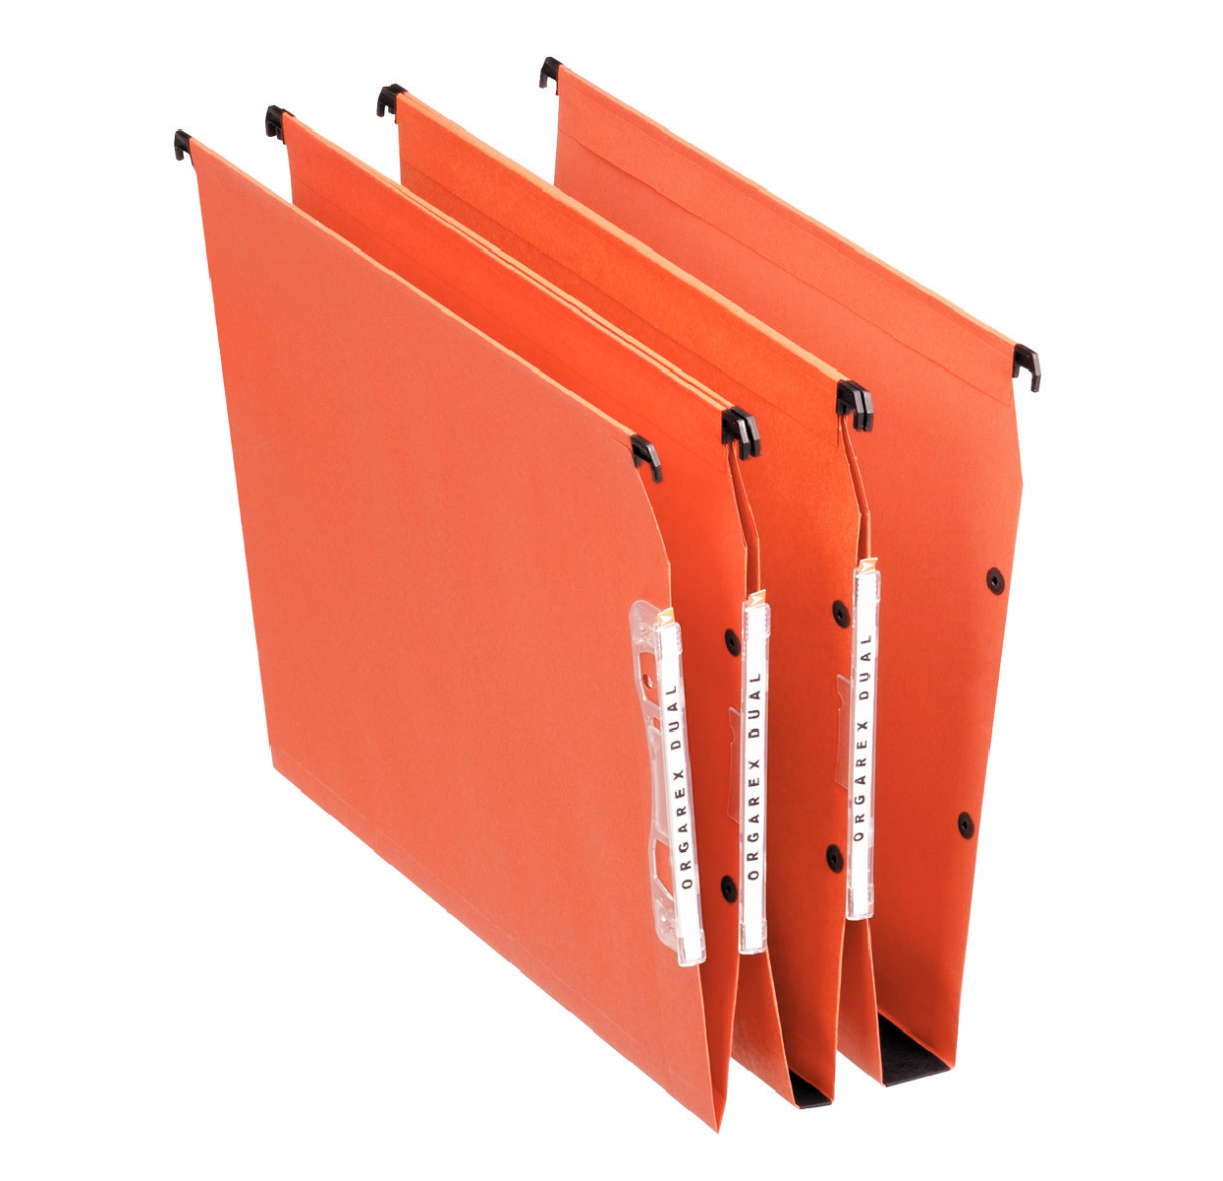 Esselte Orgarex 15mm Lateral File A4 Orange (Pack of 25) 21628